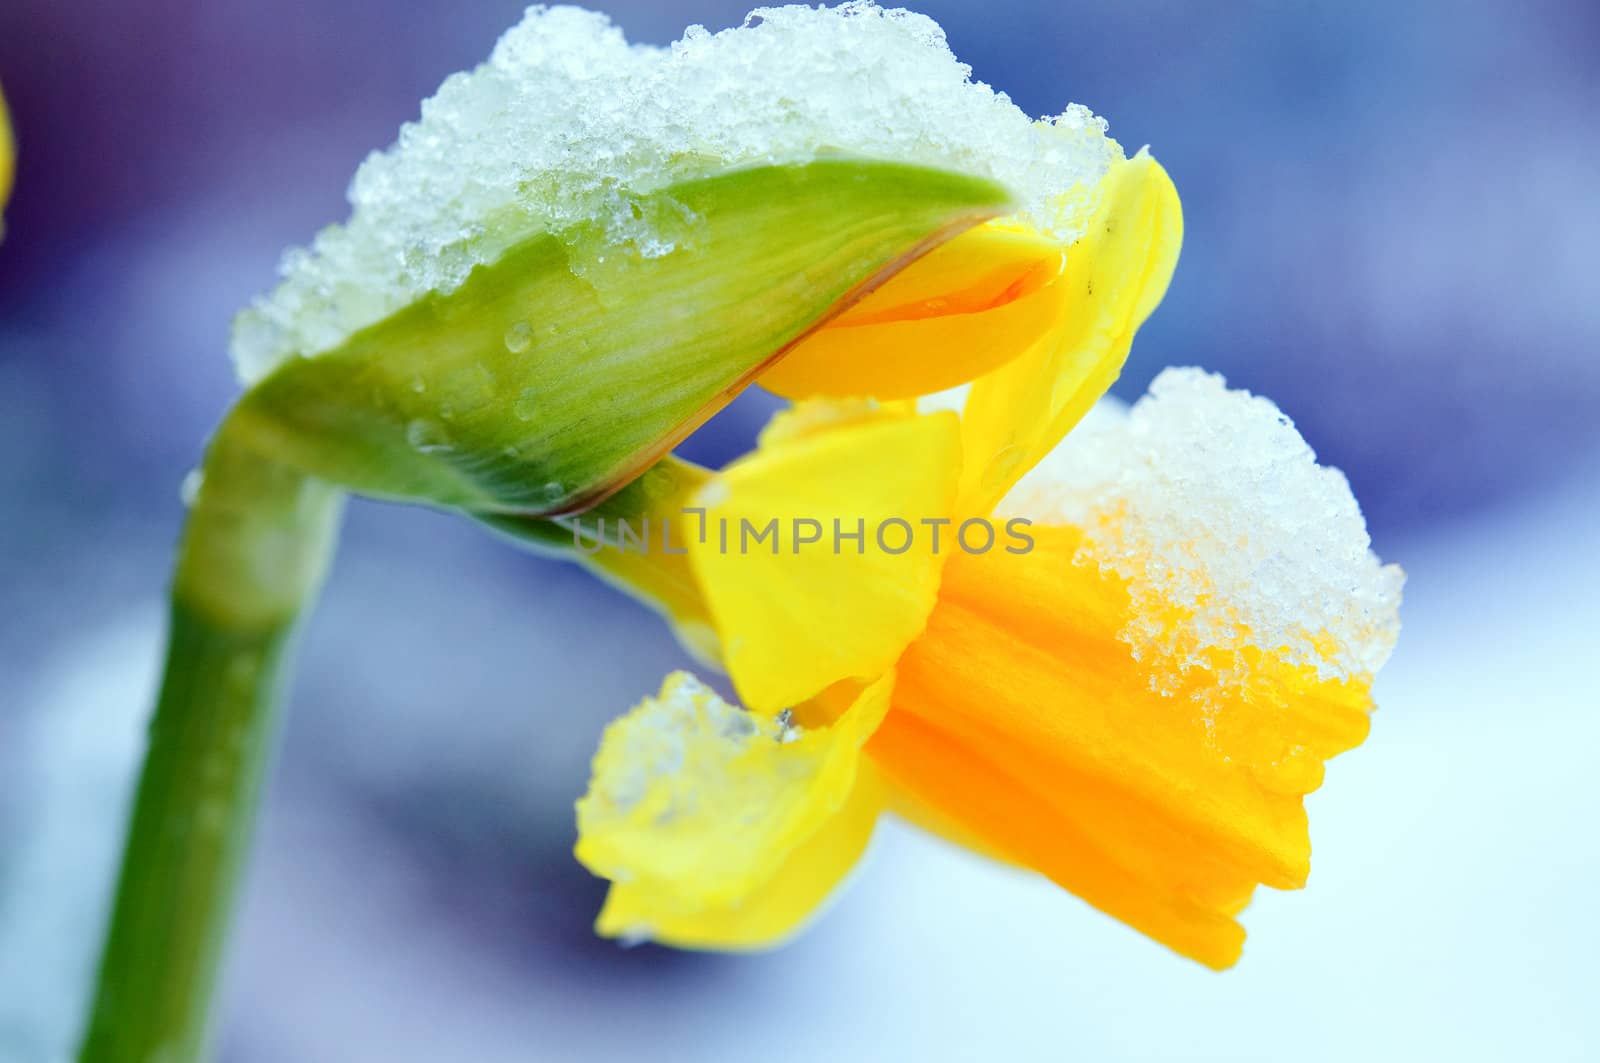 A single yellow daffodil covered by snow